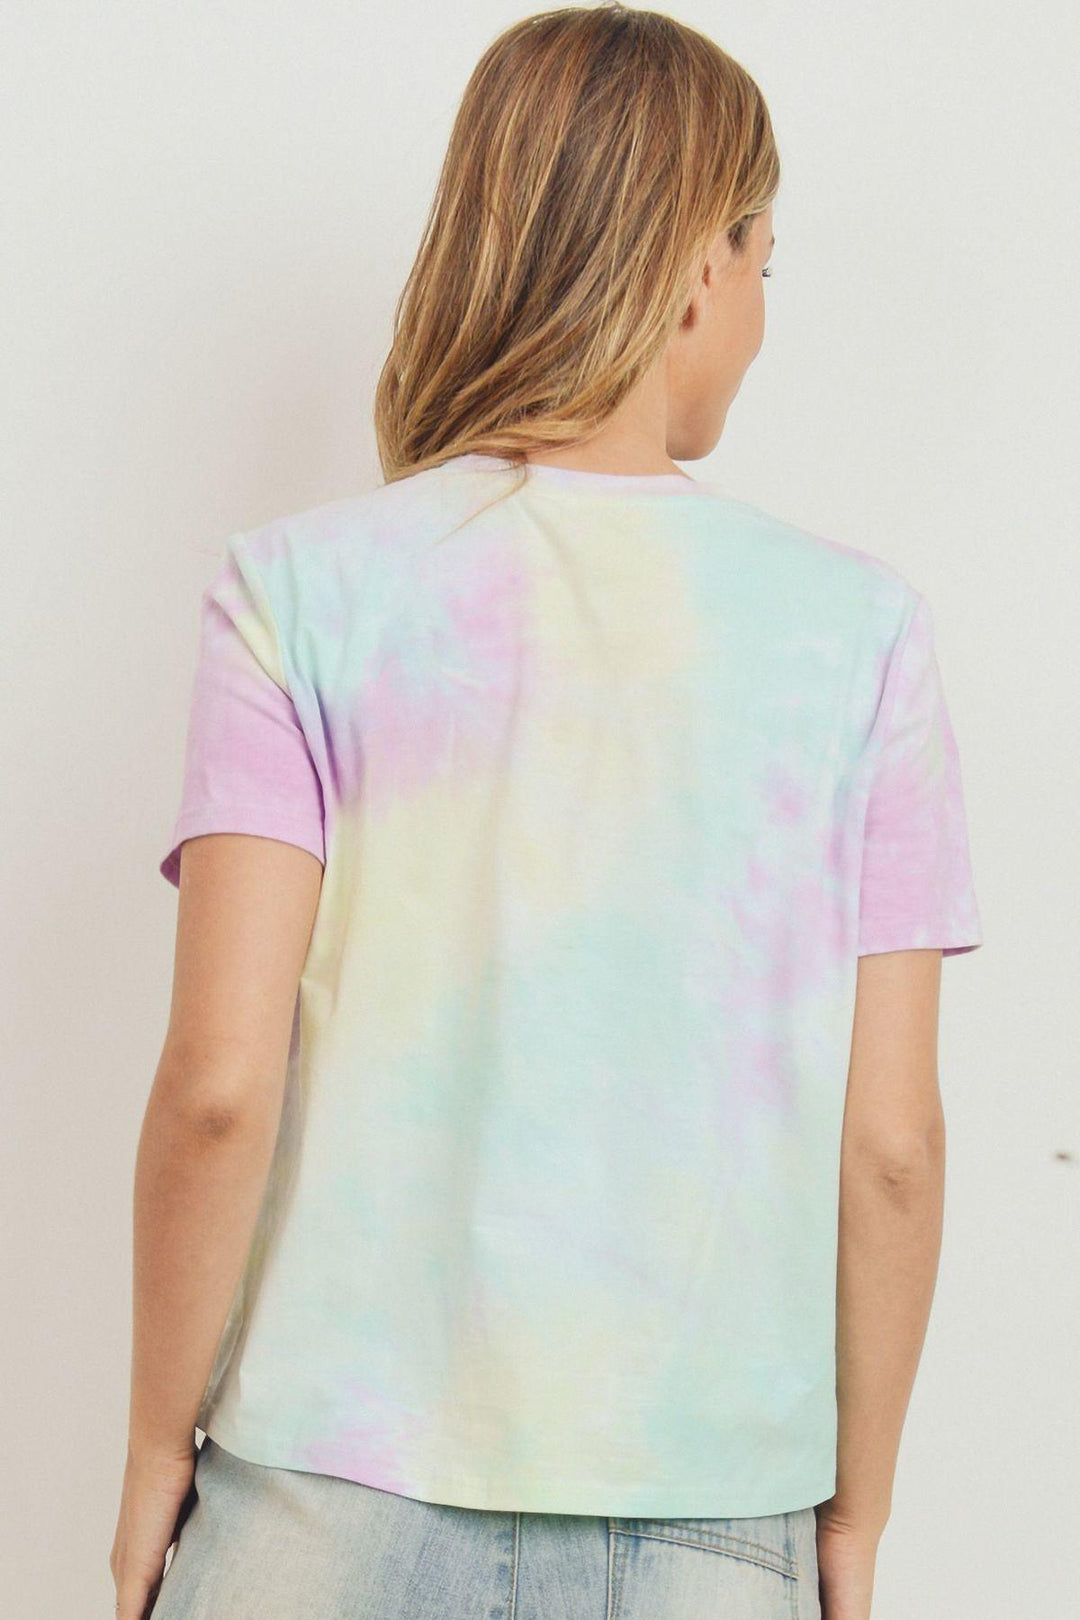 Tie Dyed Round Neck Short Sleeve Tee for Women in Green Multi